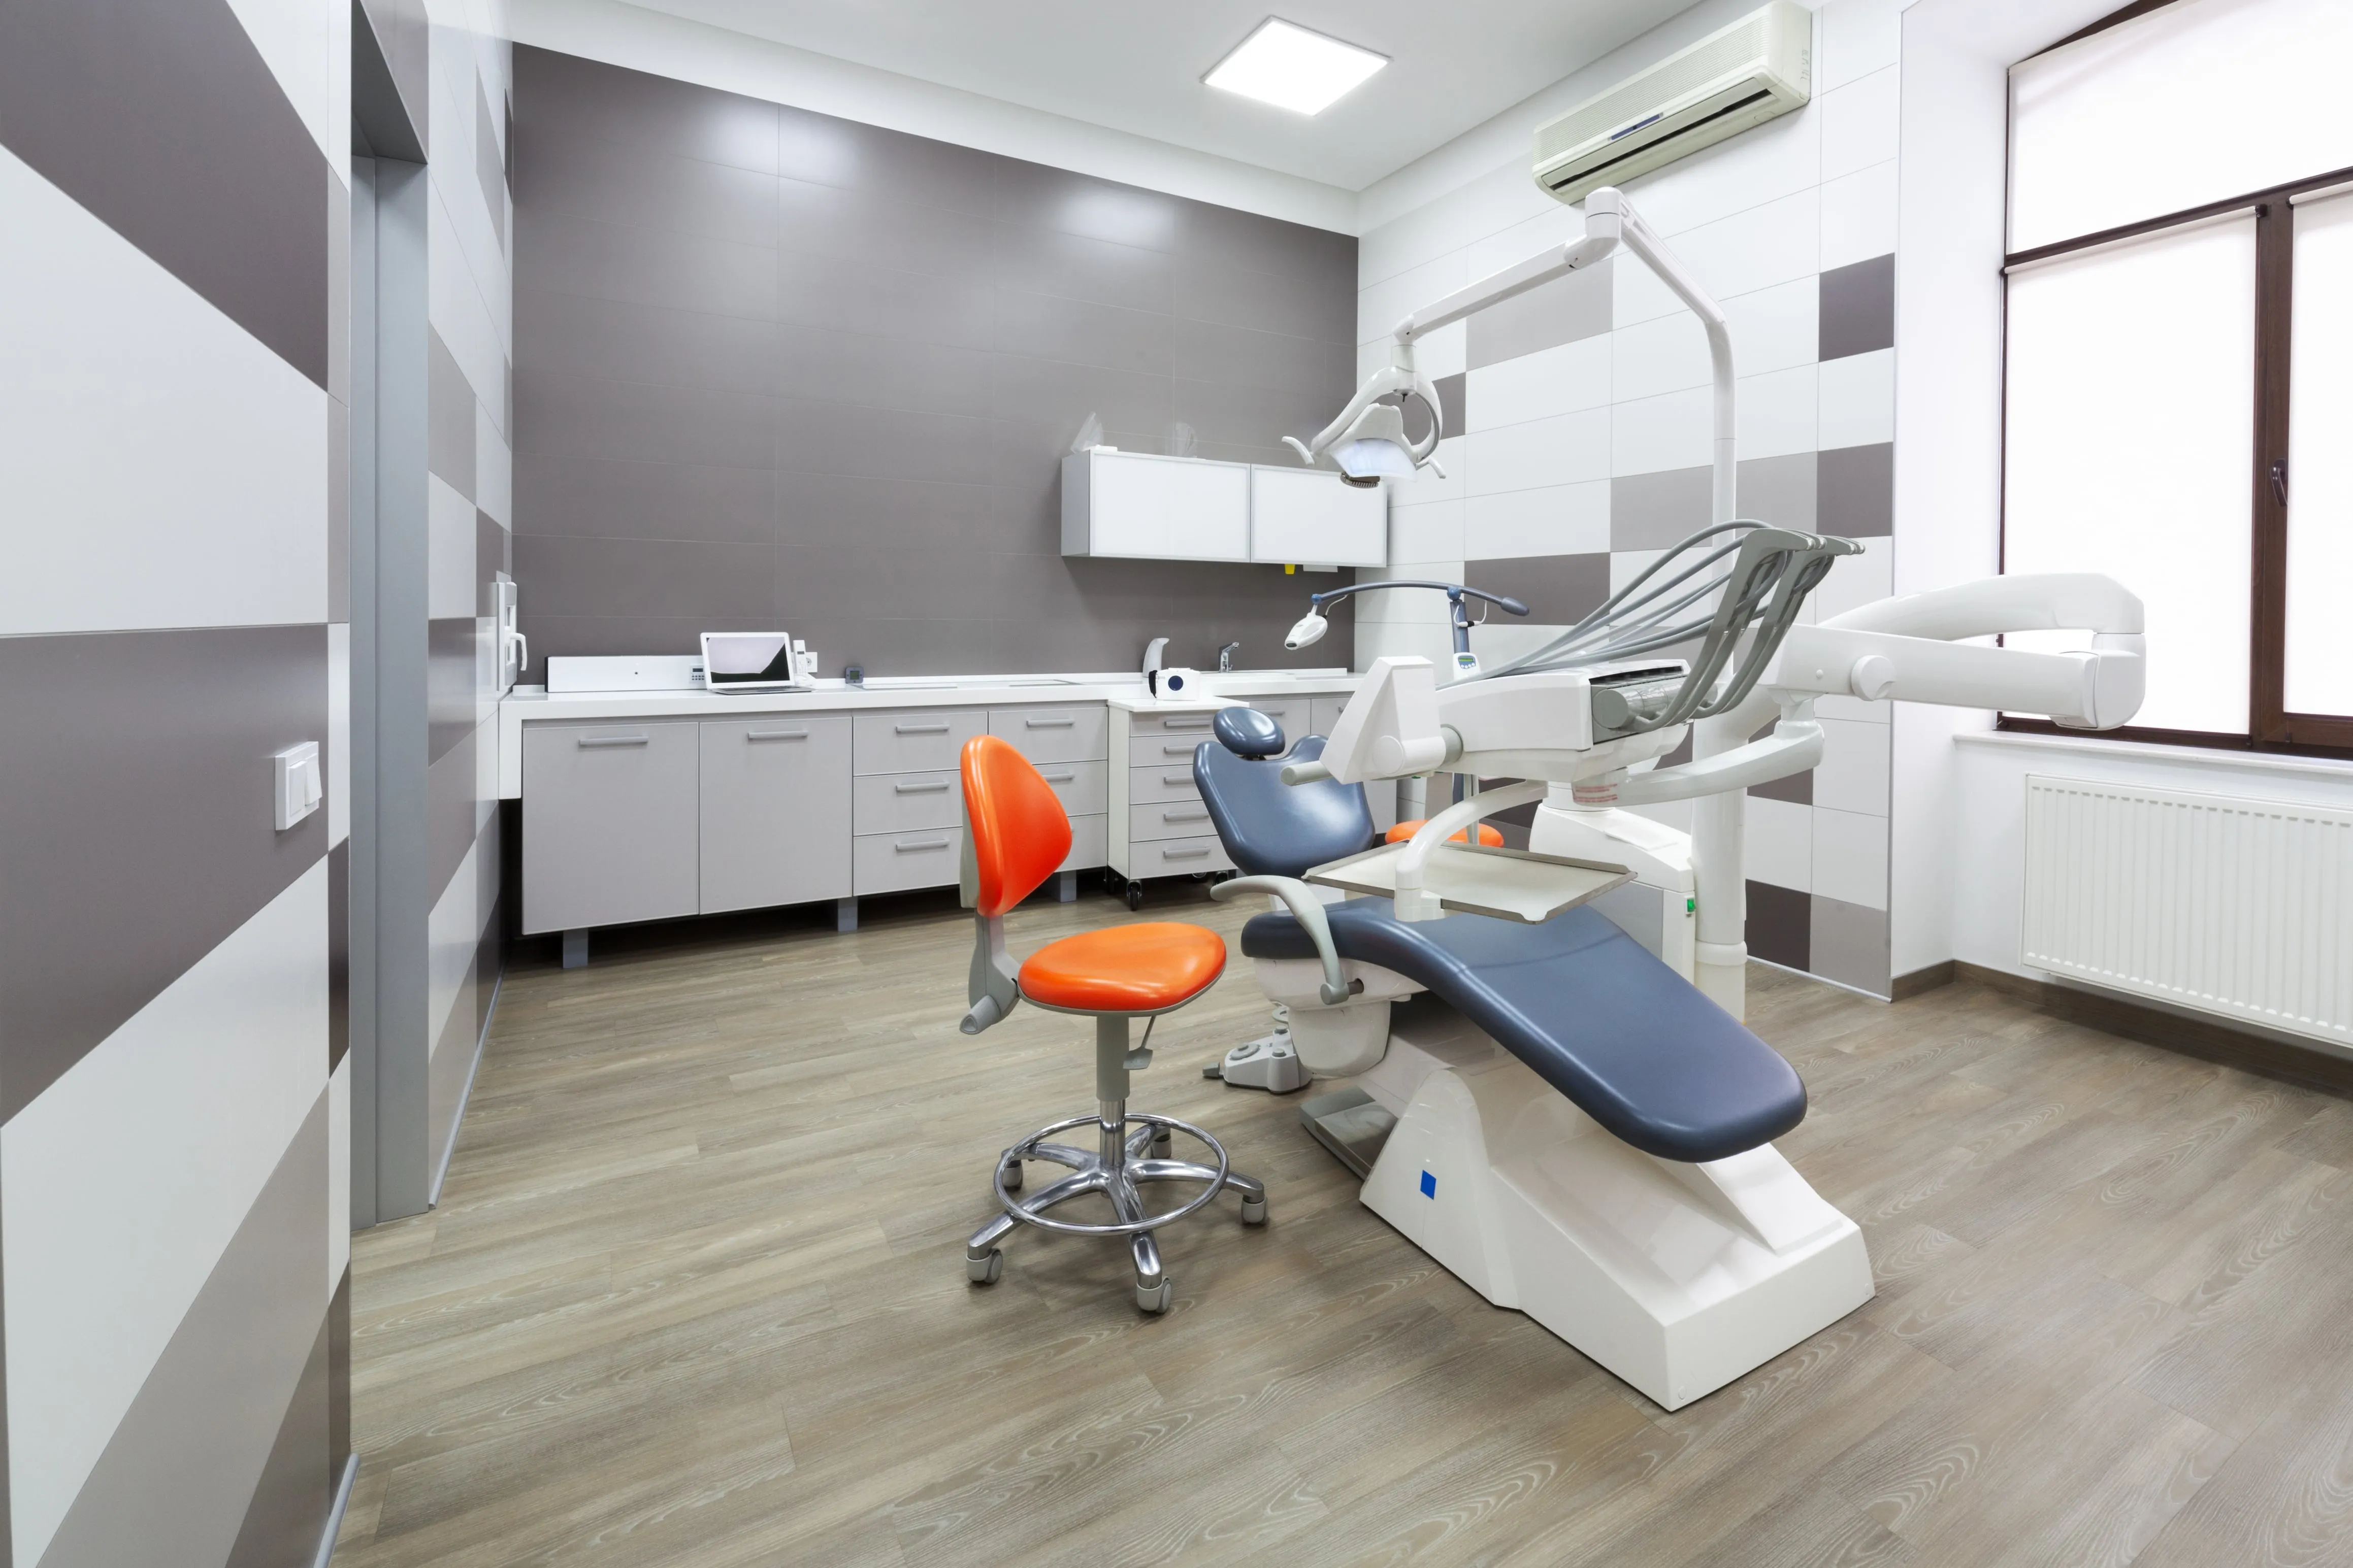 A picture of a dental office